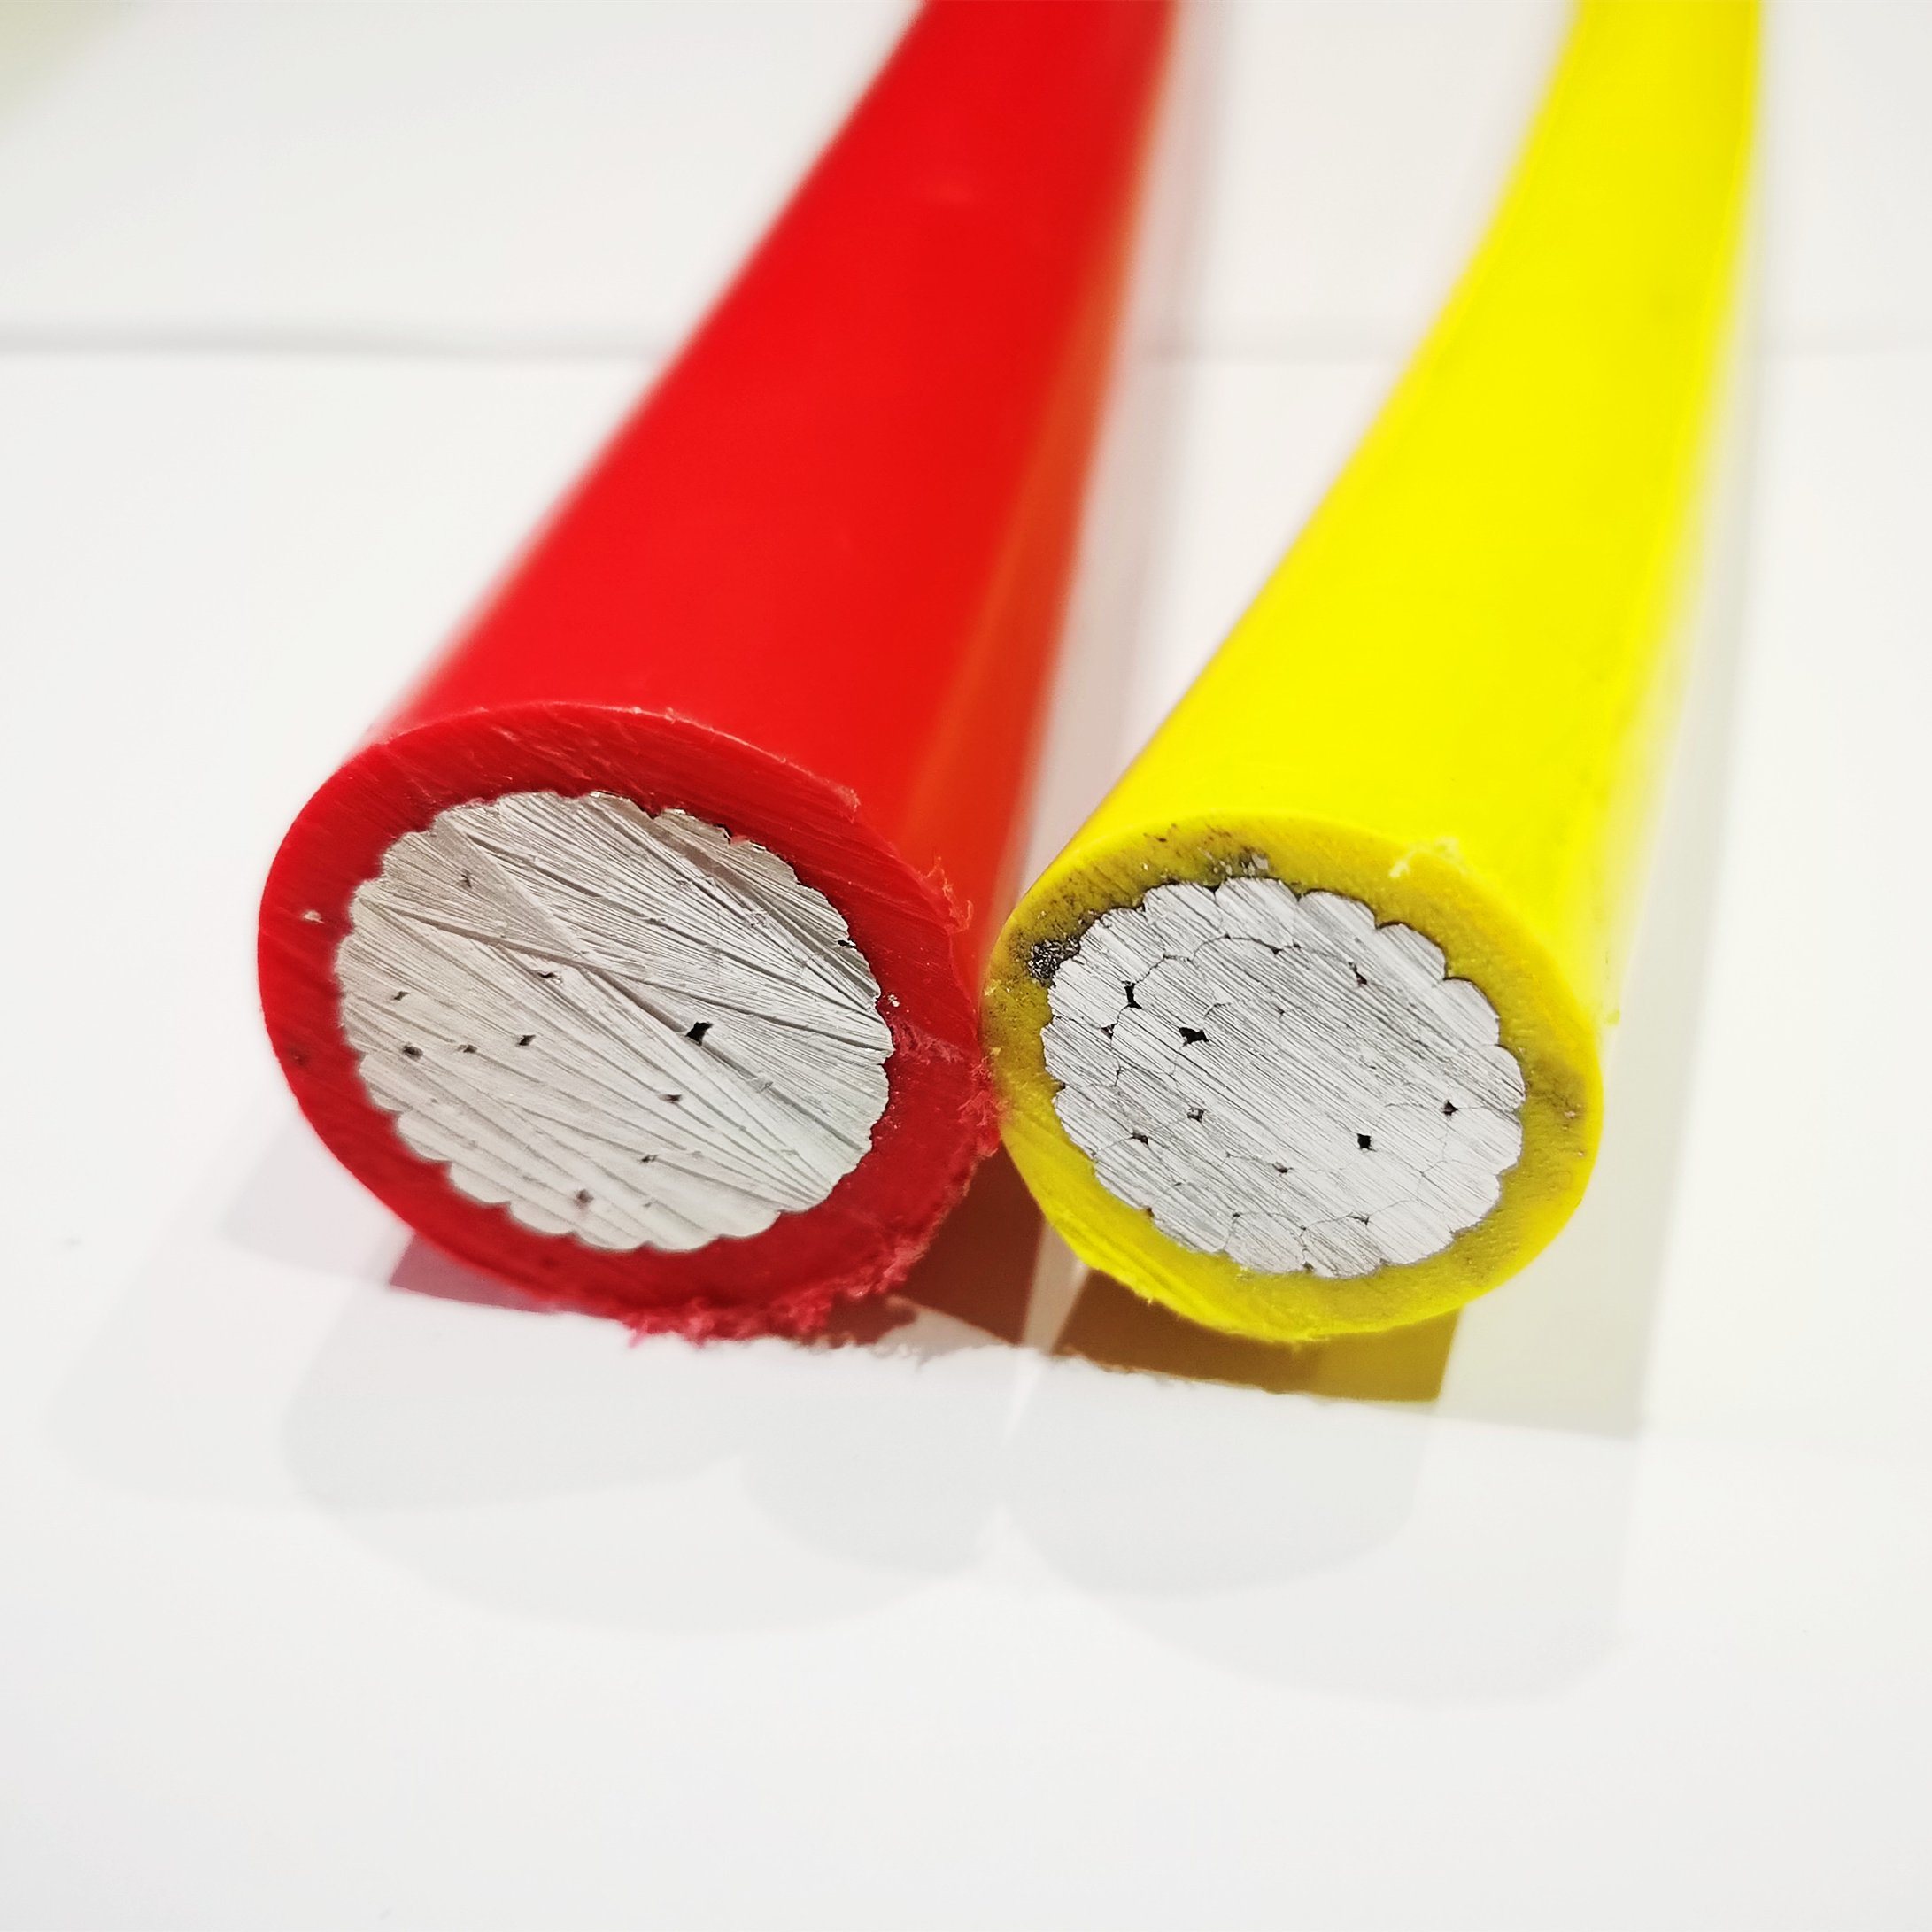 cUL Listed Rpvu90 Per C-S-a C22.2 No. 271 Flame Retardant Sun Resistance Rpv90 Wire Cable